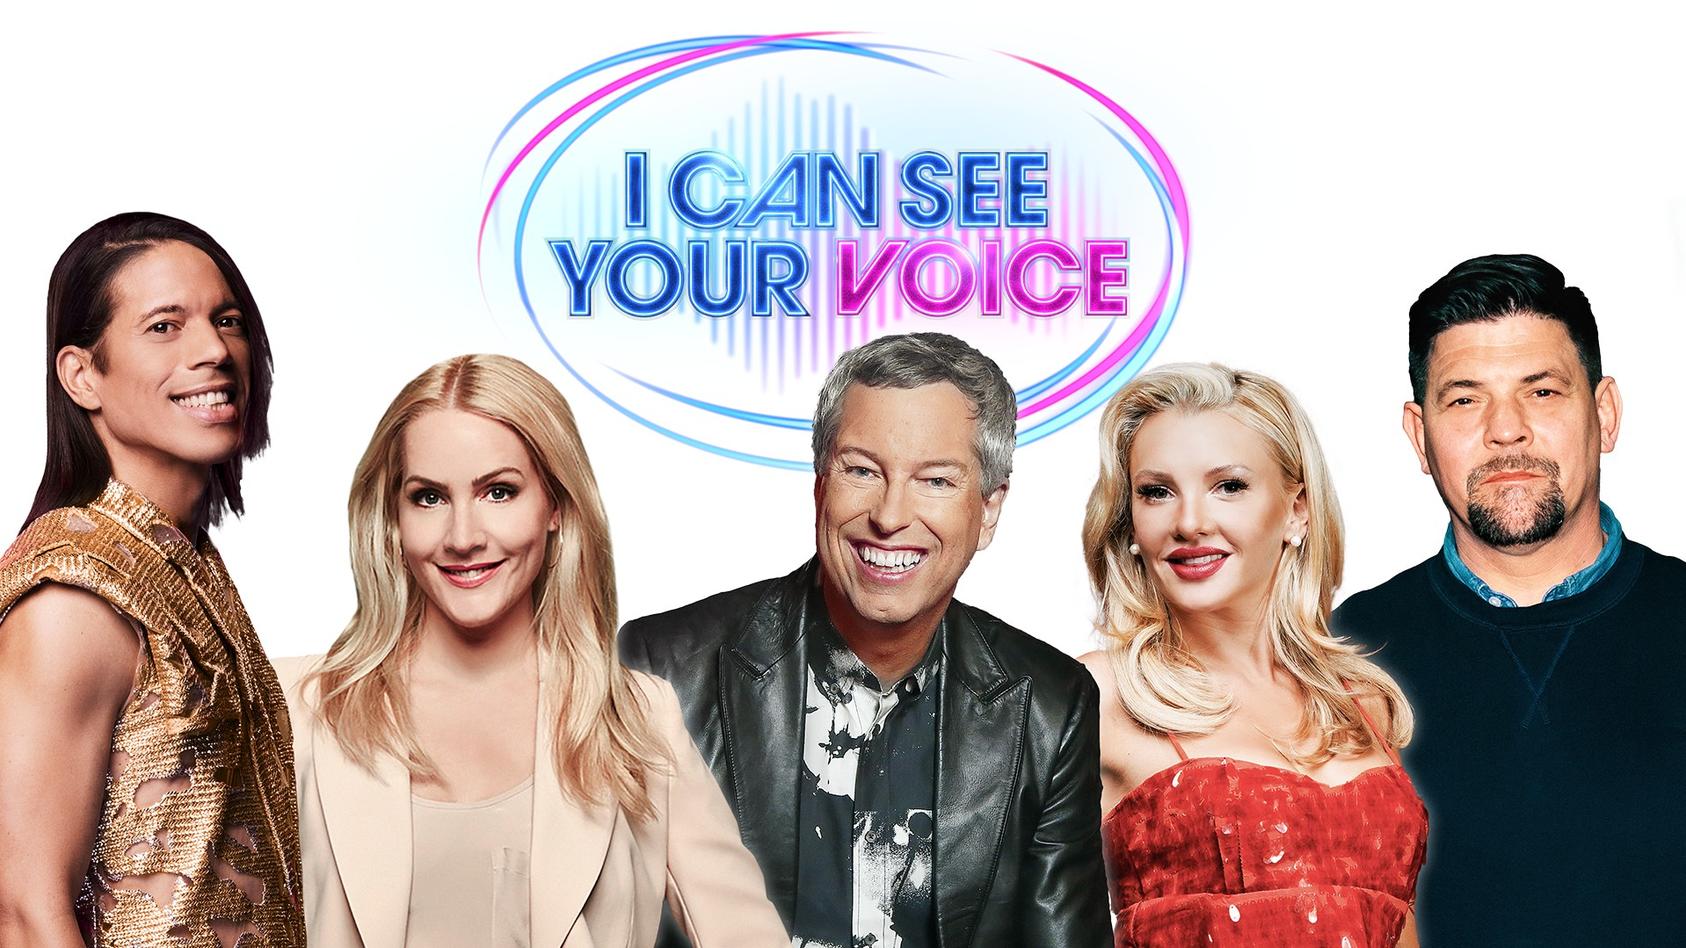 "I Can See Your Voice": Das Show Highlight bei RTL